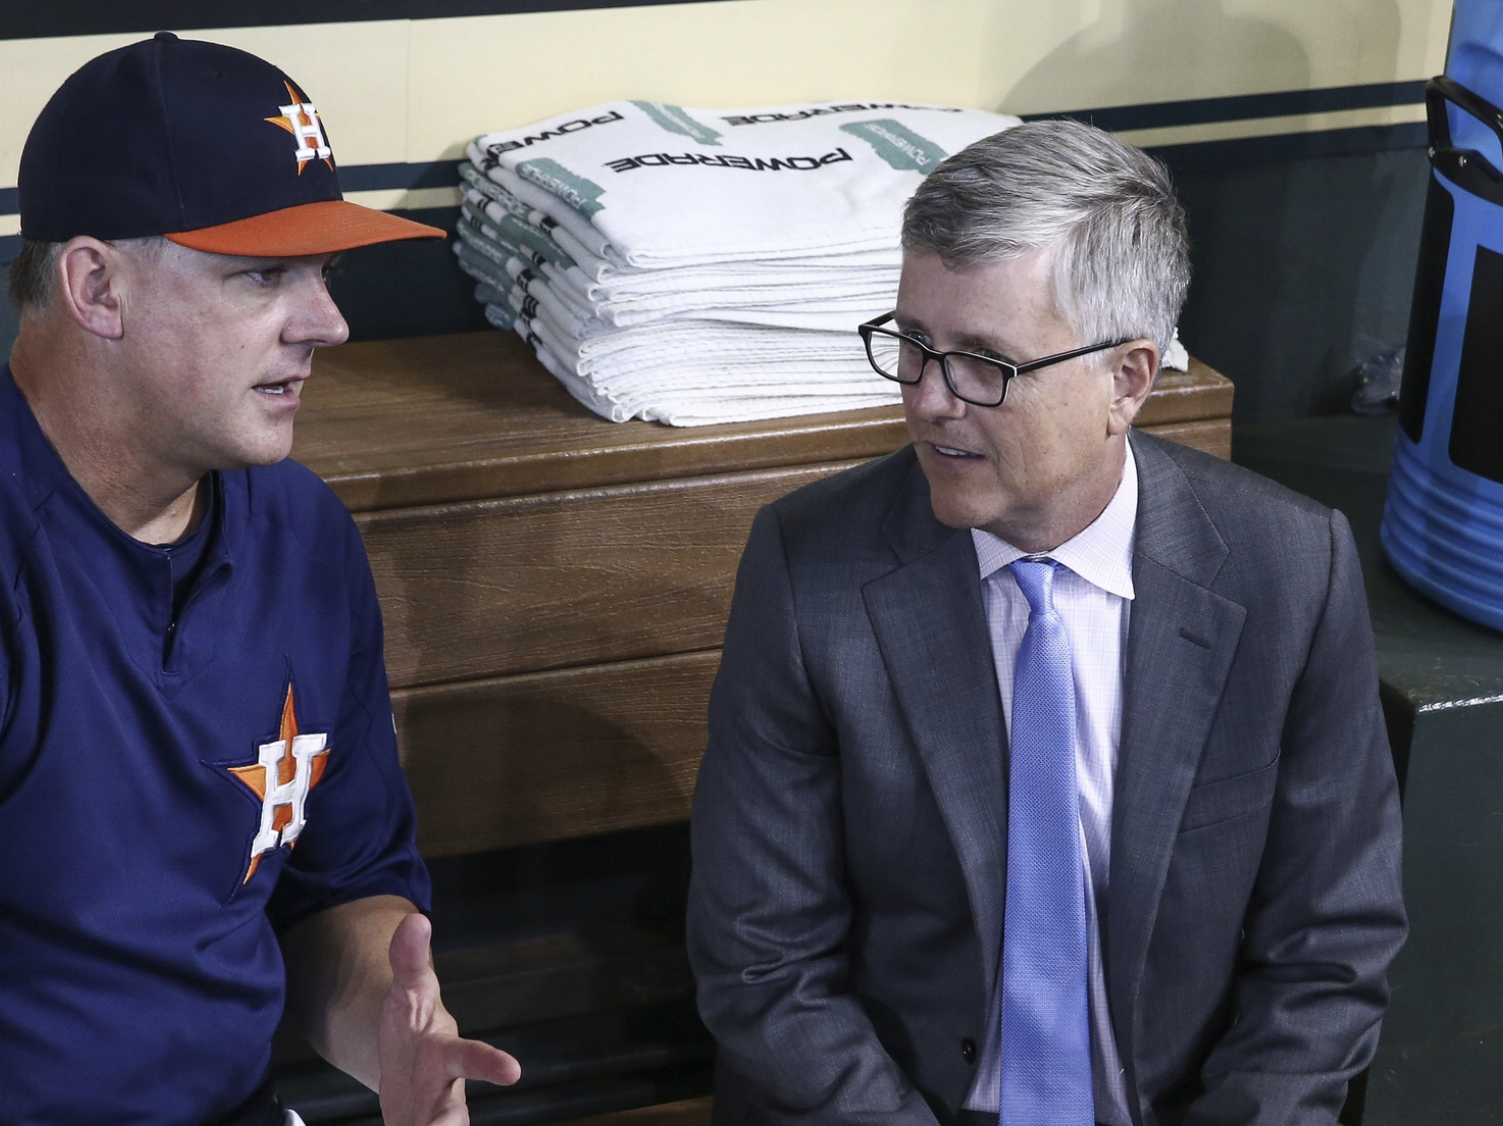 Sports world reacts to Astros firing A.J. Hinch, Jeff Luhnow